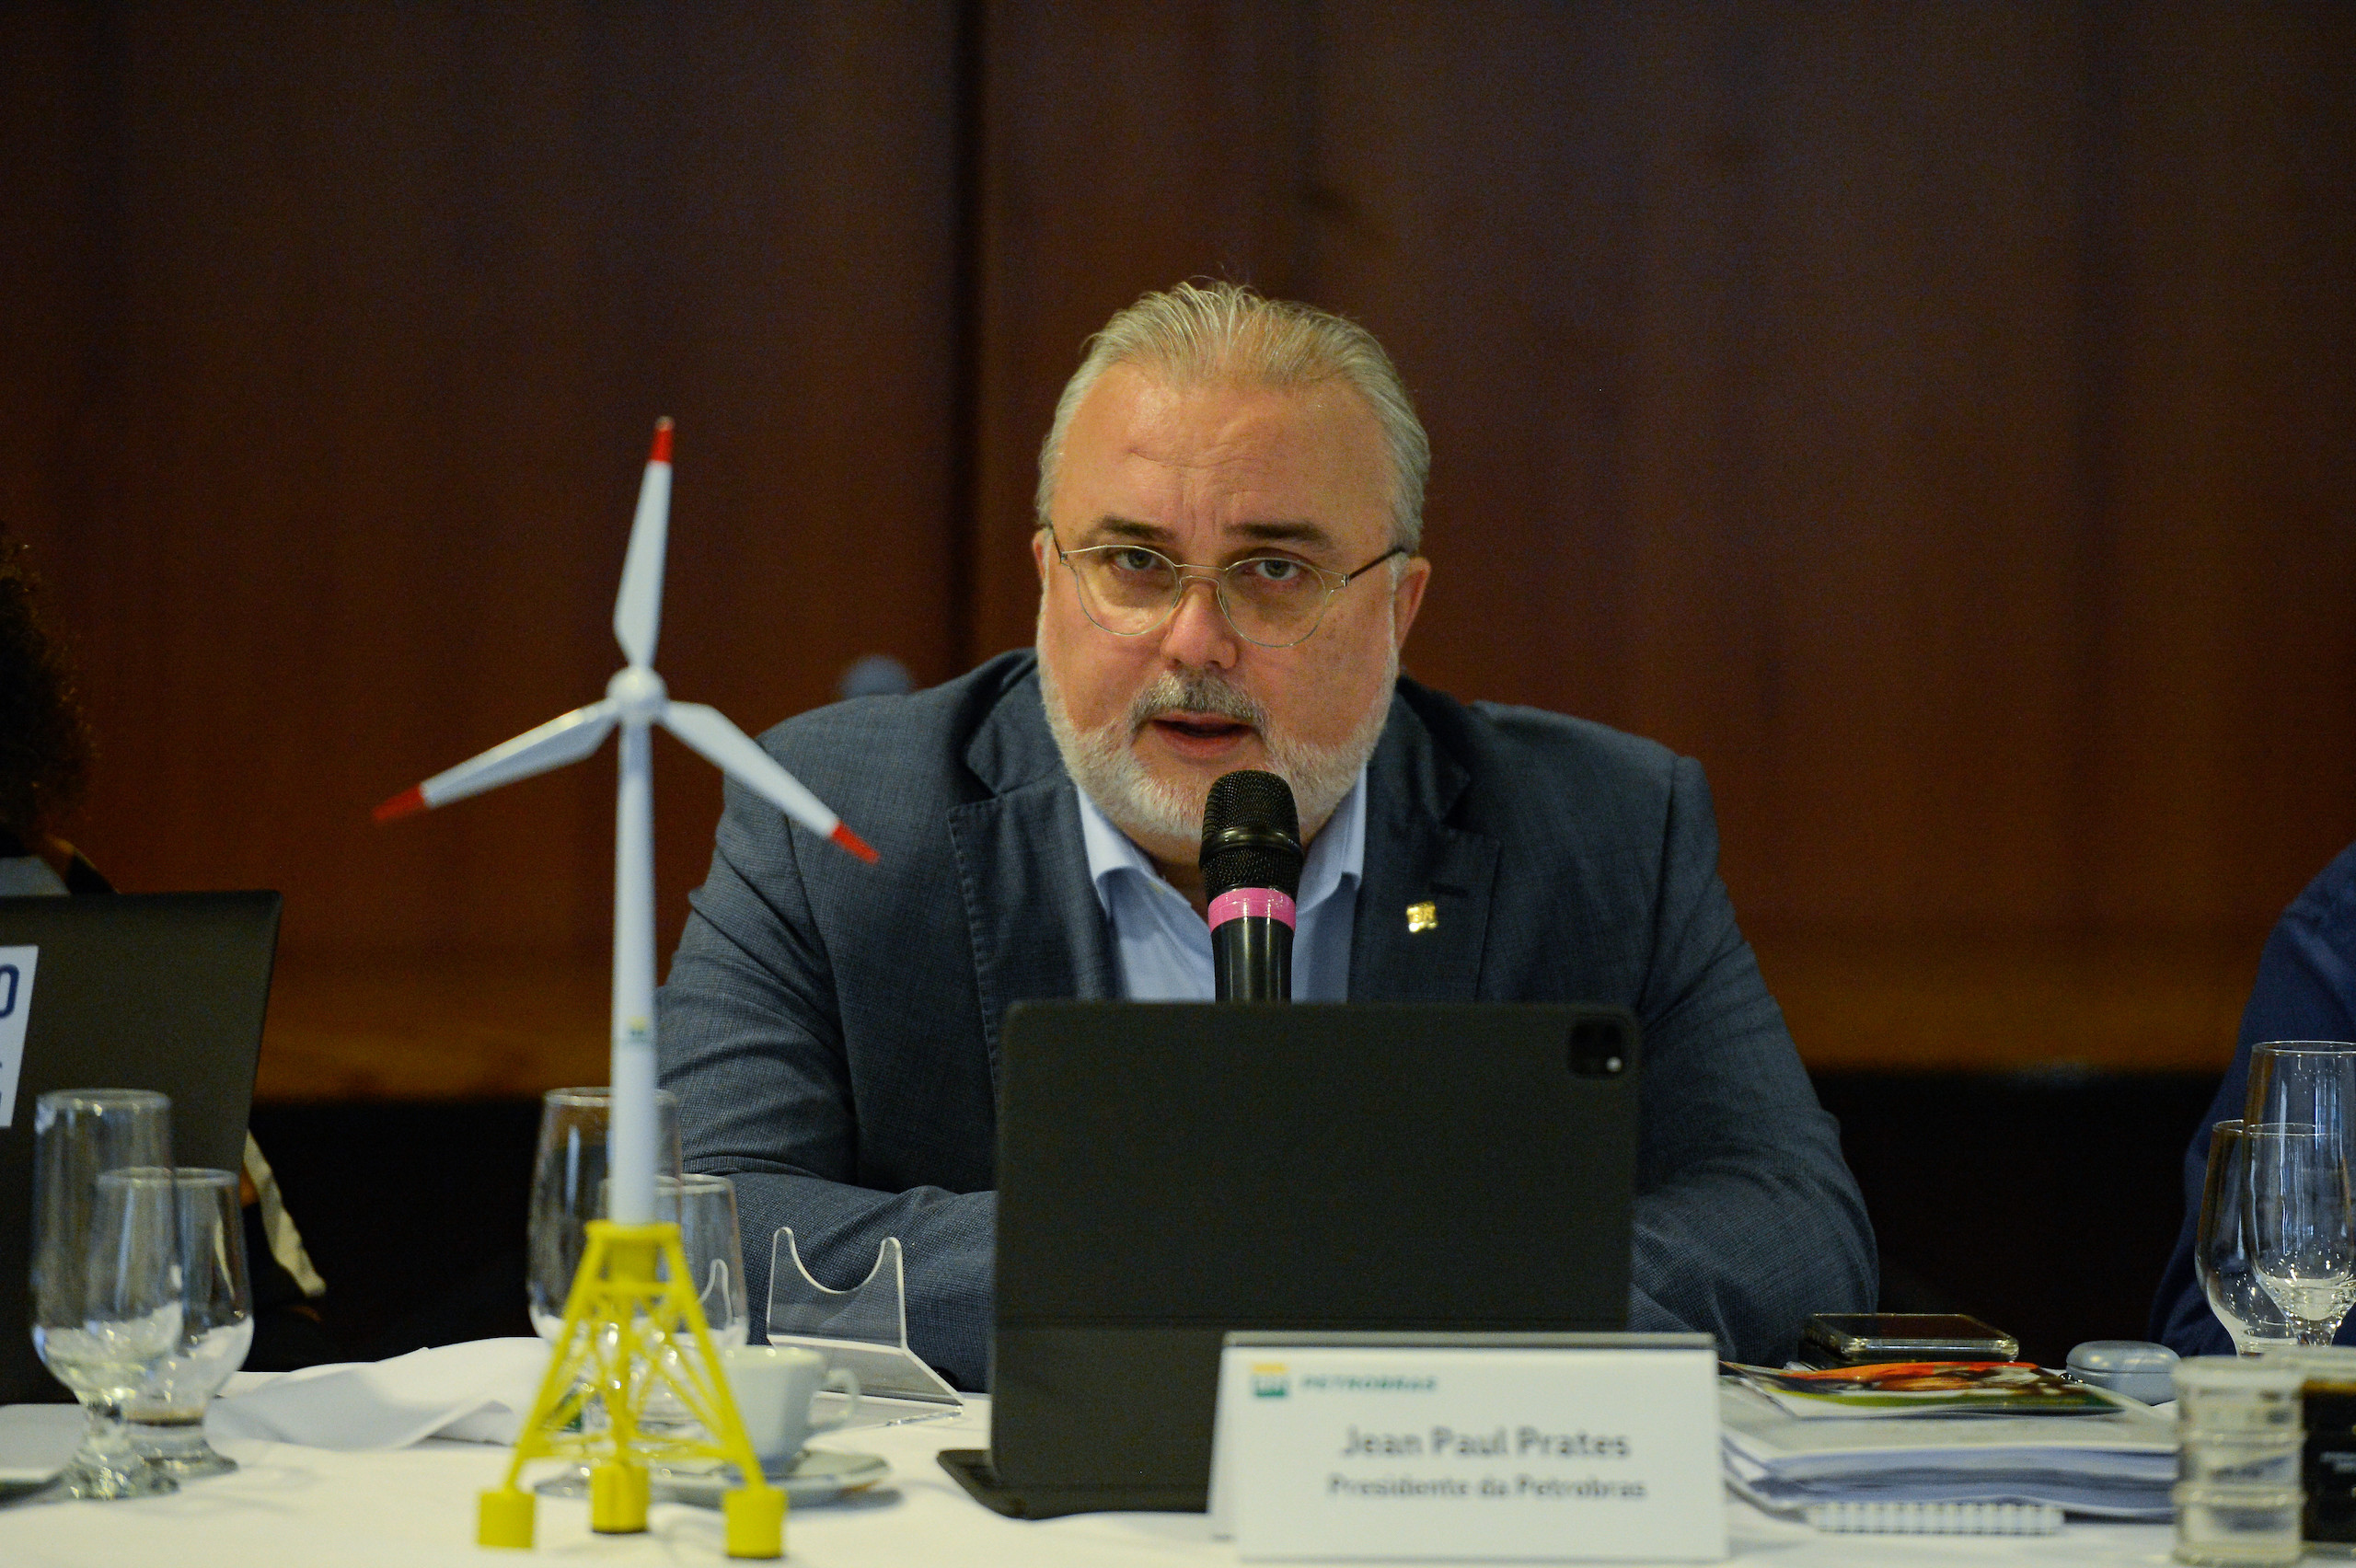 Petrobras CEO Jean Paul Prates speaking into a microphone next to a model wind turbine